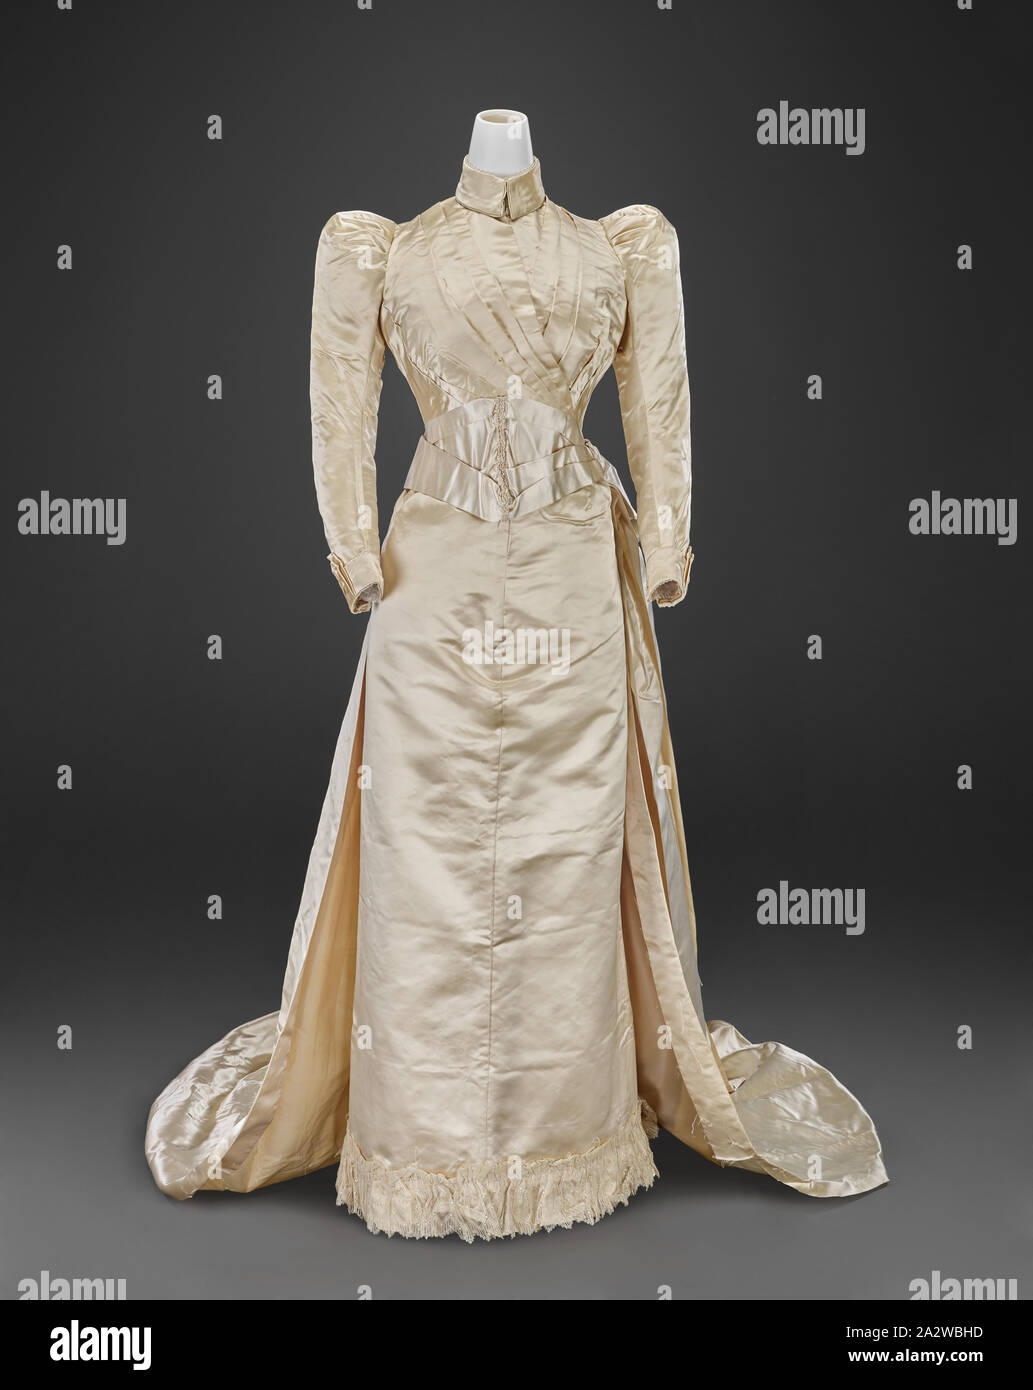 wedding gown (bodice, skirt, train), Louis Valentin, Dressmaker (American, born Hungarian, about 1859-1937), 1890, silk, lace, A) bodice: center back 17 in., center front 15 in., bust 30-1/2 in., waist 23-1/2 in., sleeve length 19 in., shoulders 11 in. B) skirt: center back 38-1/2 in., center front 38-1/2 in., waist 19 in., hips 40 in. C) train: 70 x 50 in. D) fabric fragment: 110 x 11-1/4 in. E) fabric fragment: 23-1/2 x 14 in., A) bodice: Label, sewn: Louis Valentin, Boston Label, handwritten and sewn: Mary Addison Bybee, October 15 1890, Indianapolis Indiana, Textile and Fashion Arts Stock Photo